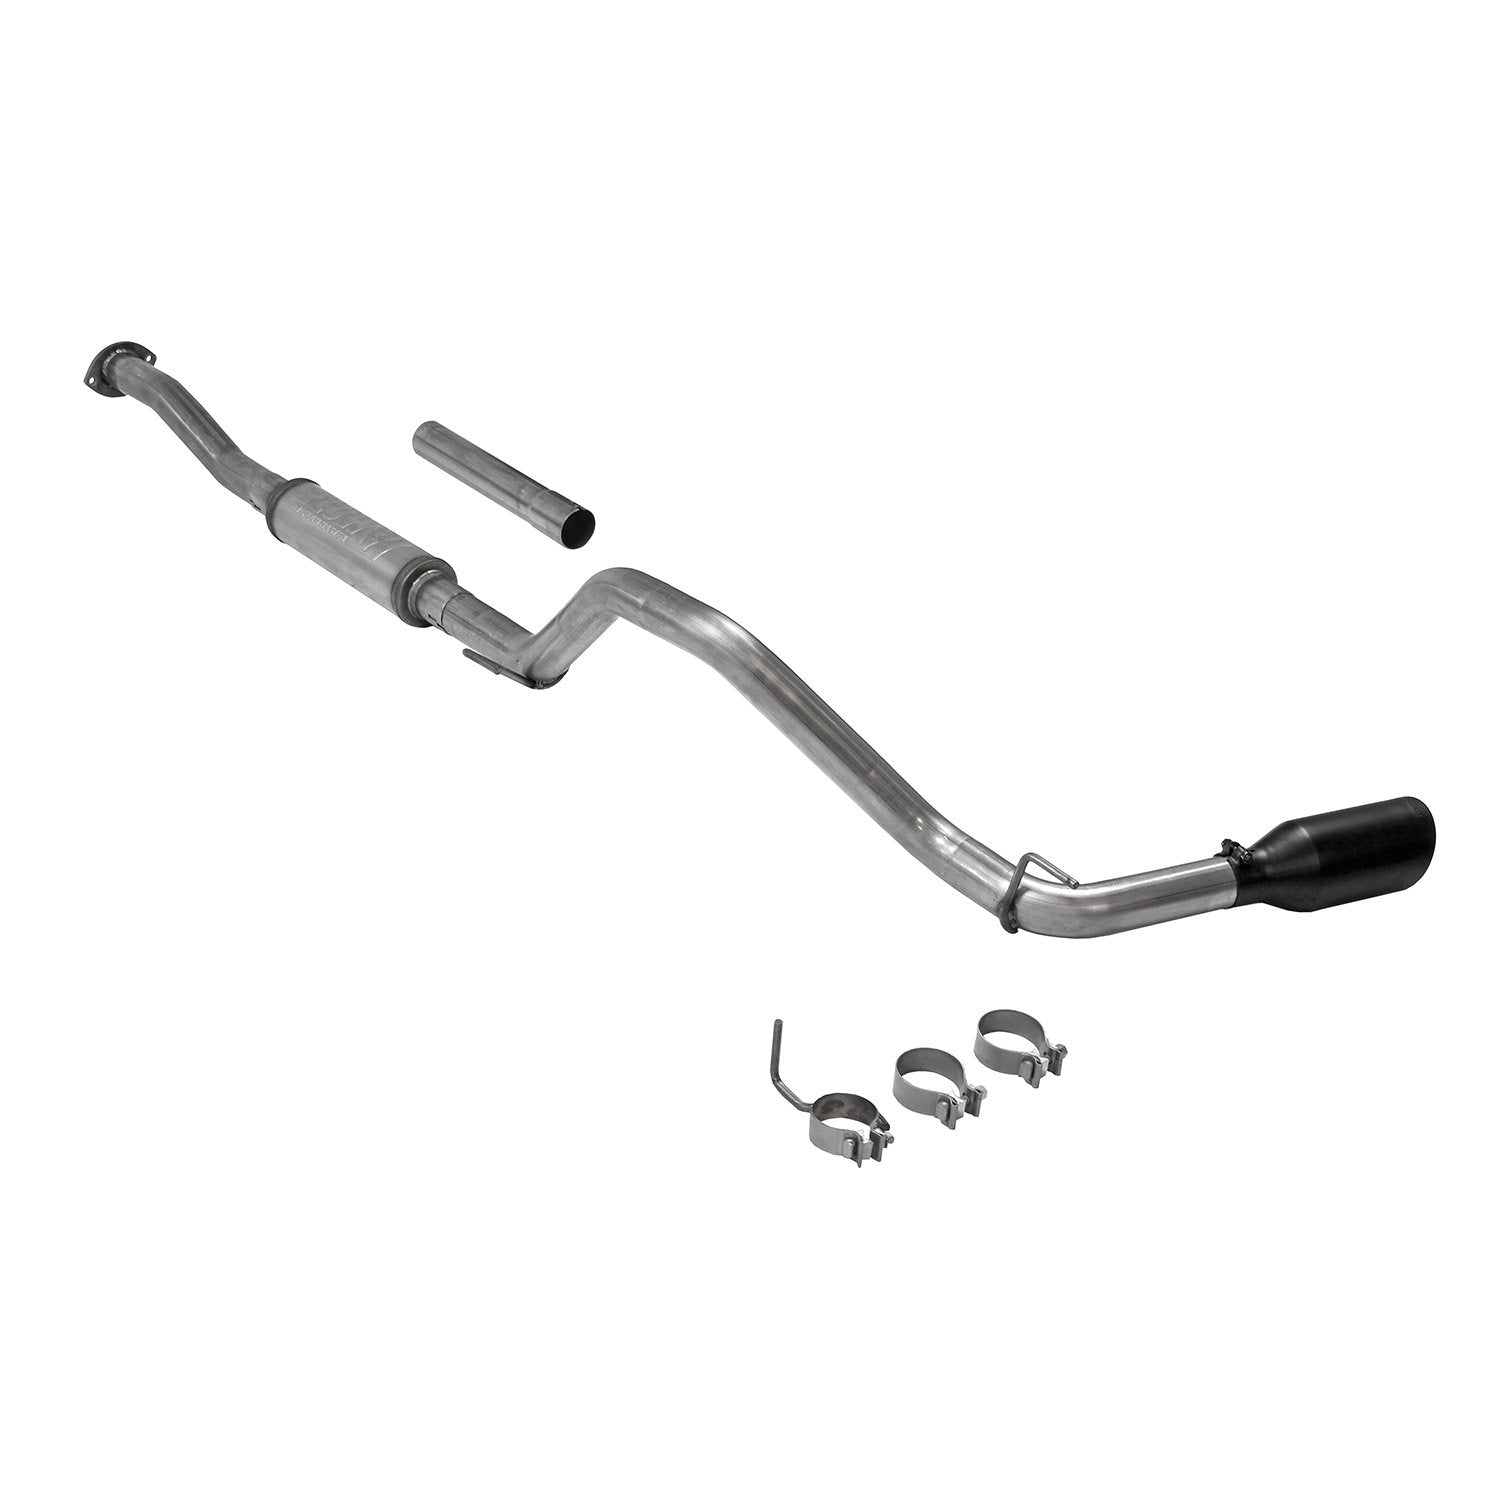 '16-23 Toyota Tacoma Flowmaster FlowFX Cat-Back Exhaust System Performance Flowmaster parts